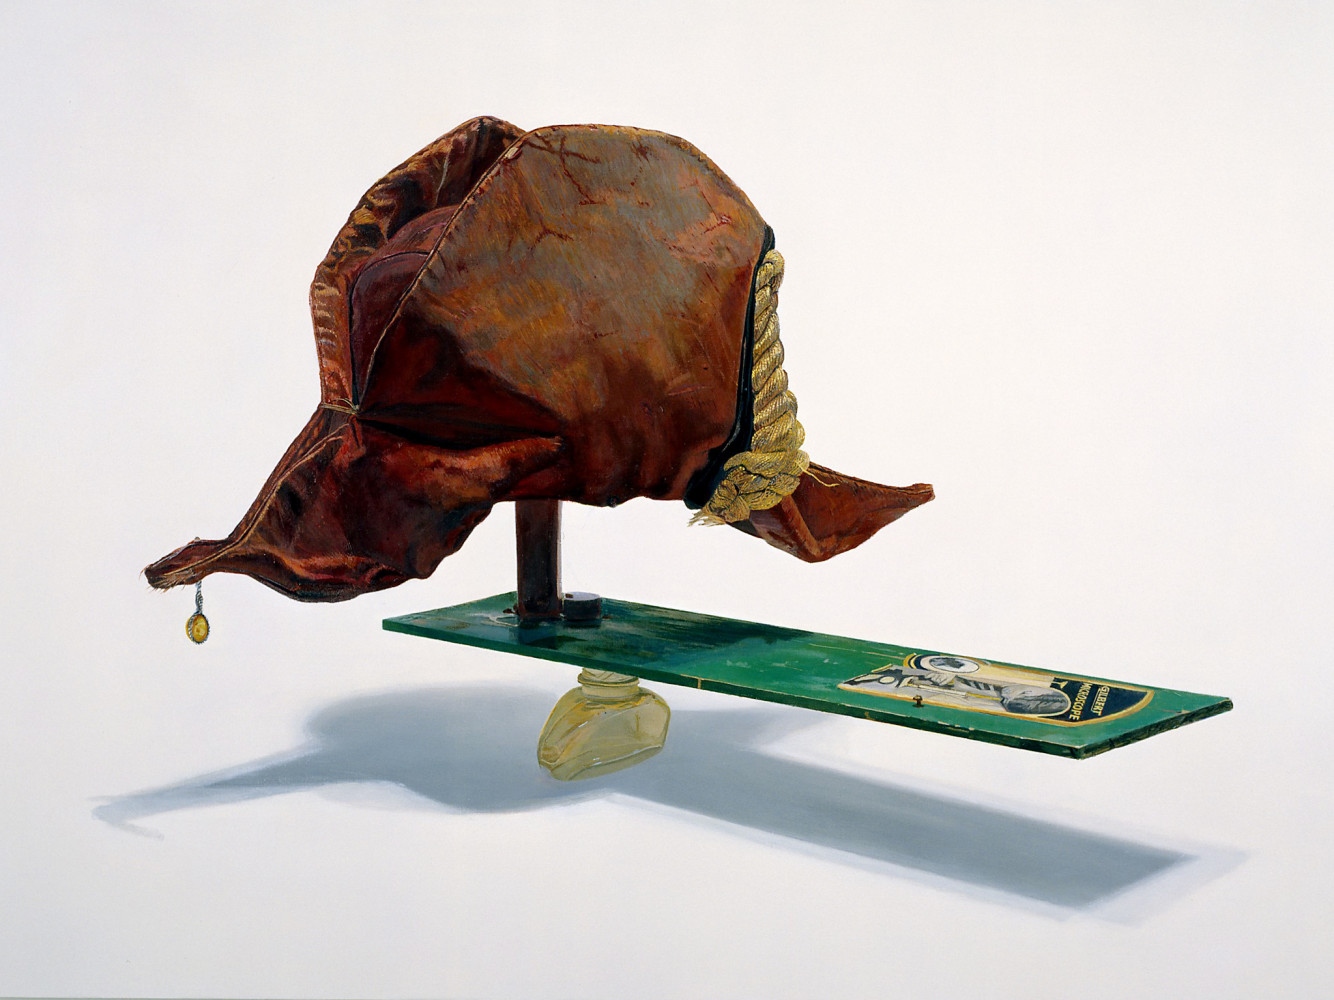 ‘Jim Butler’, The Napoleon Hat, 2001, oil on canvas